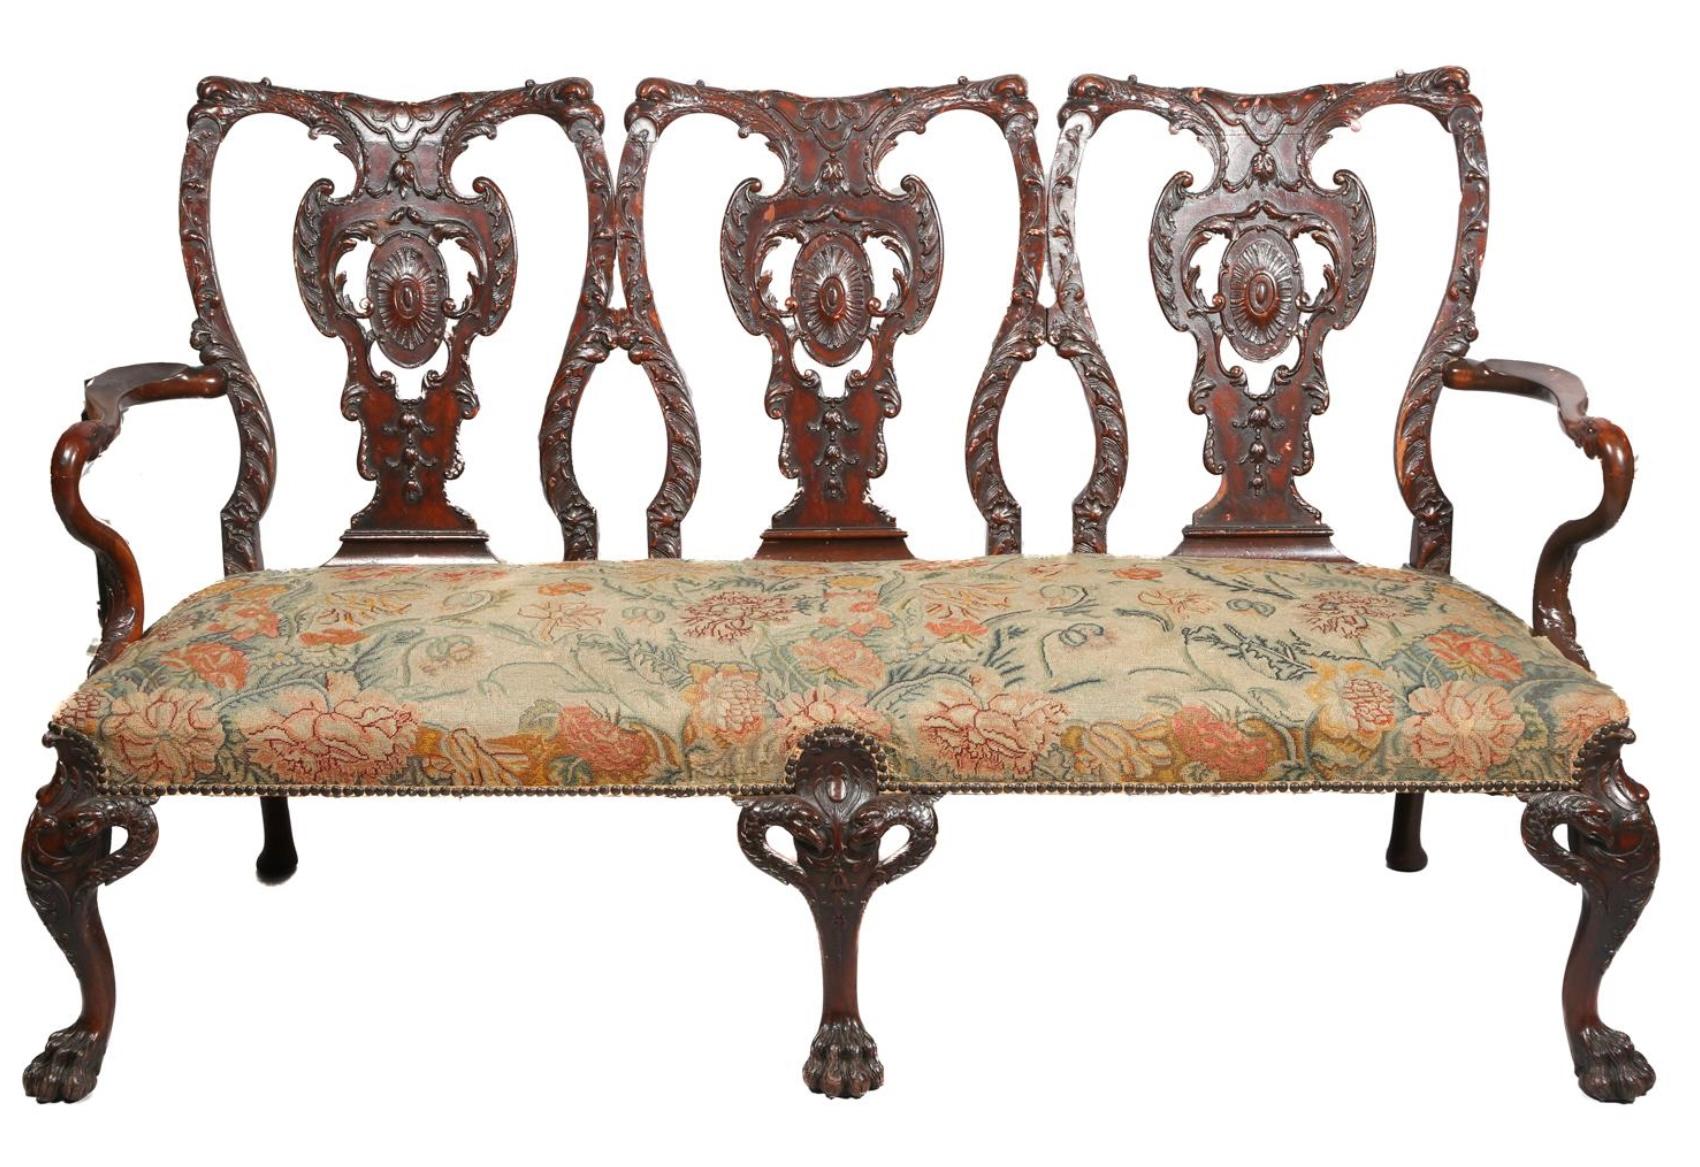 Breathtaking George II Style Carved Wood Settee with Needlepoint Upholstery For Sale 3